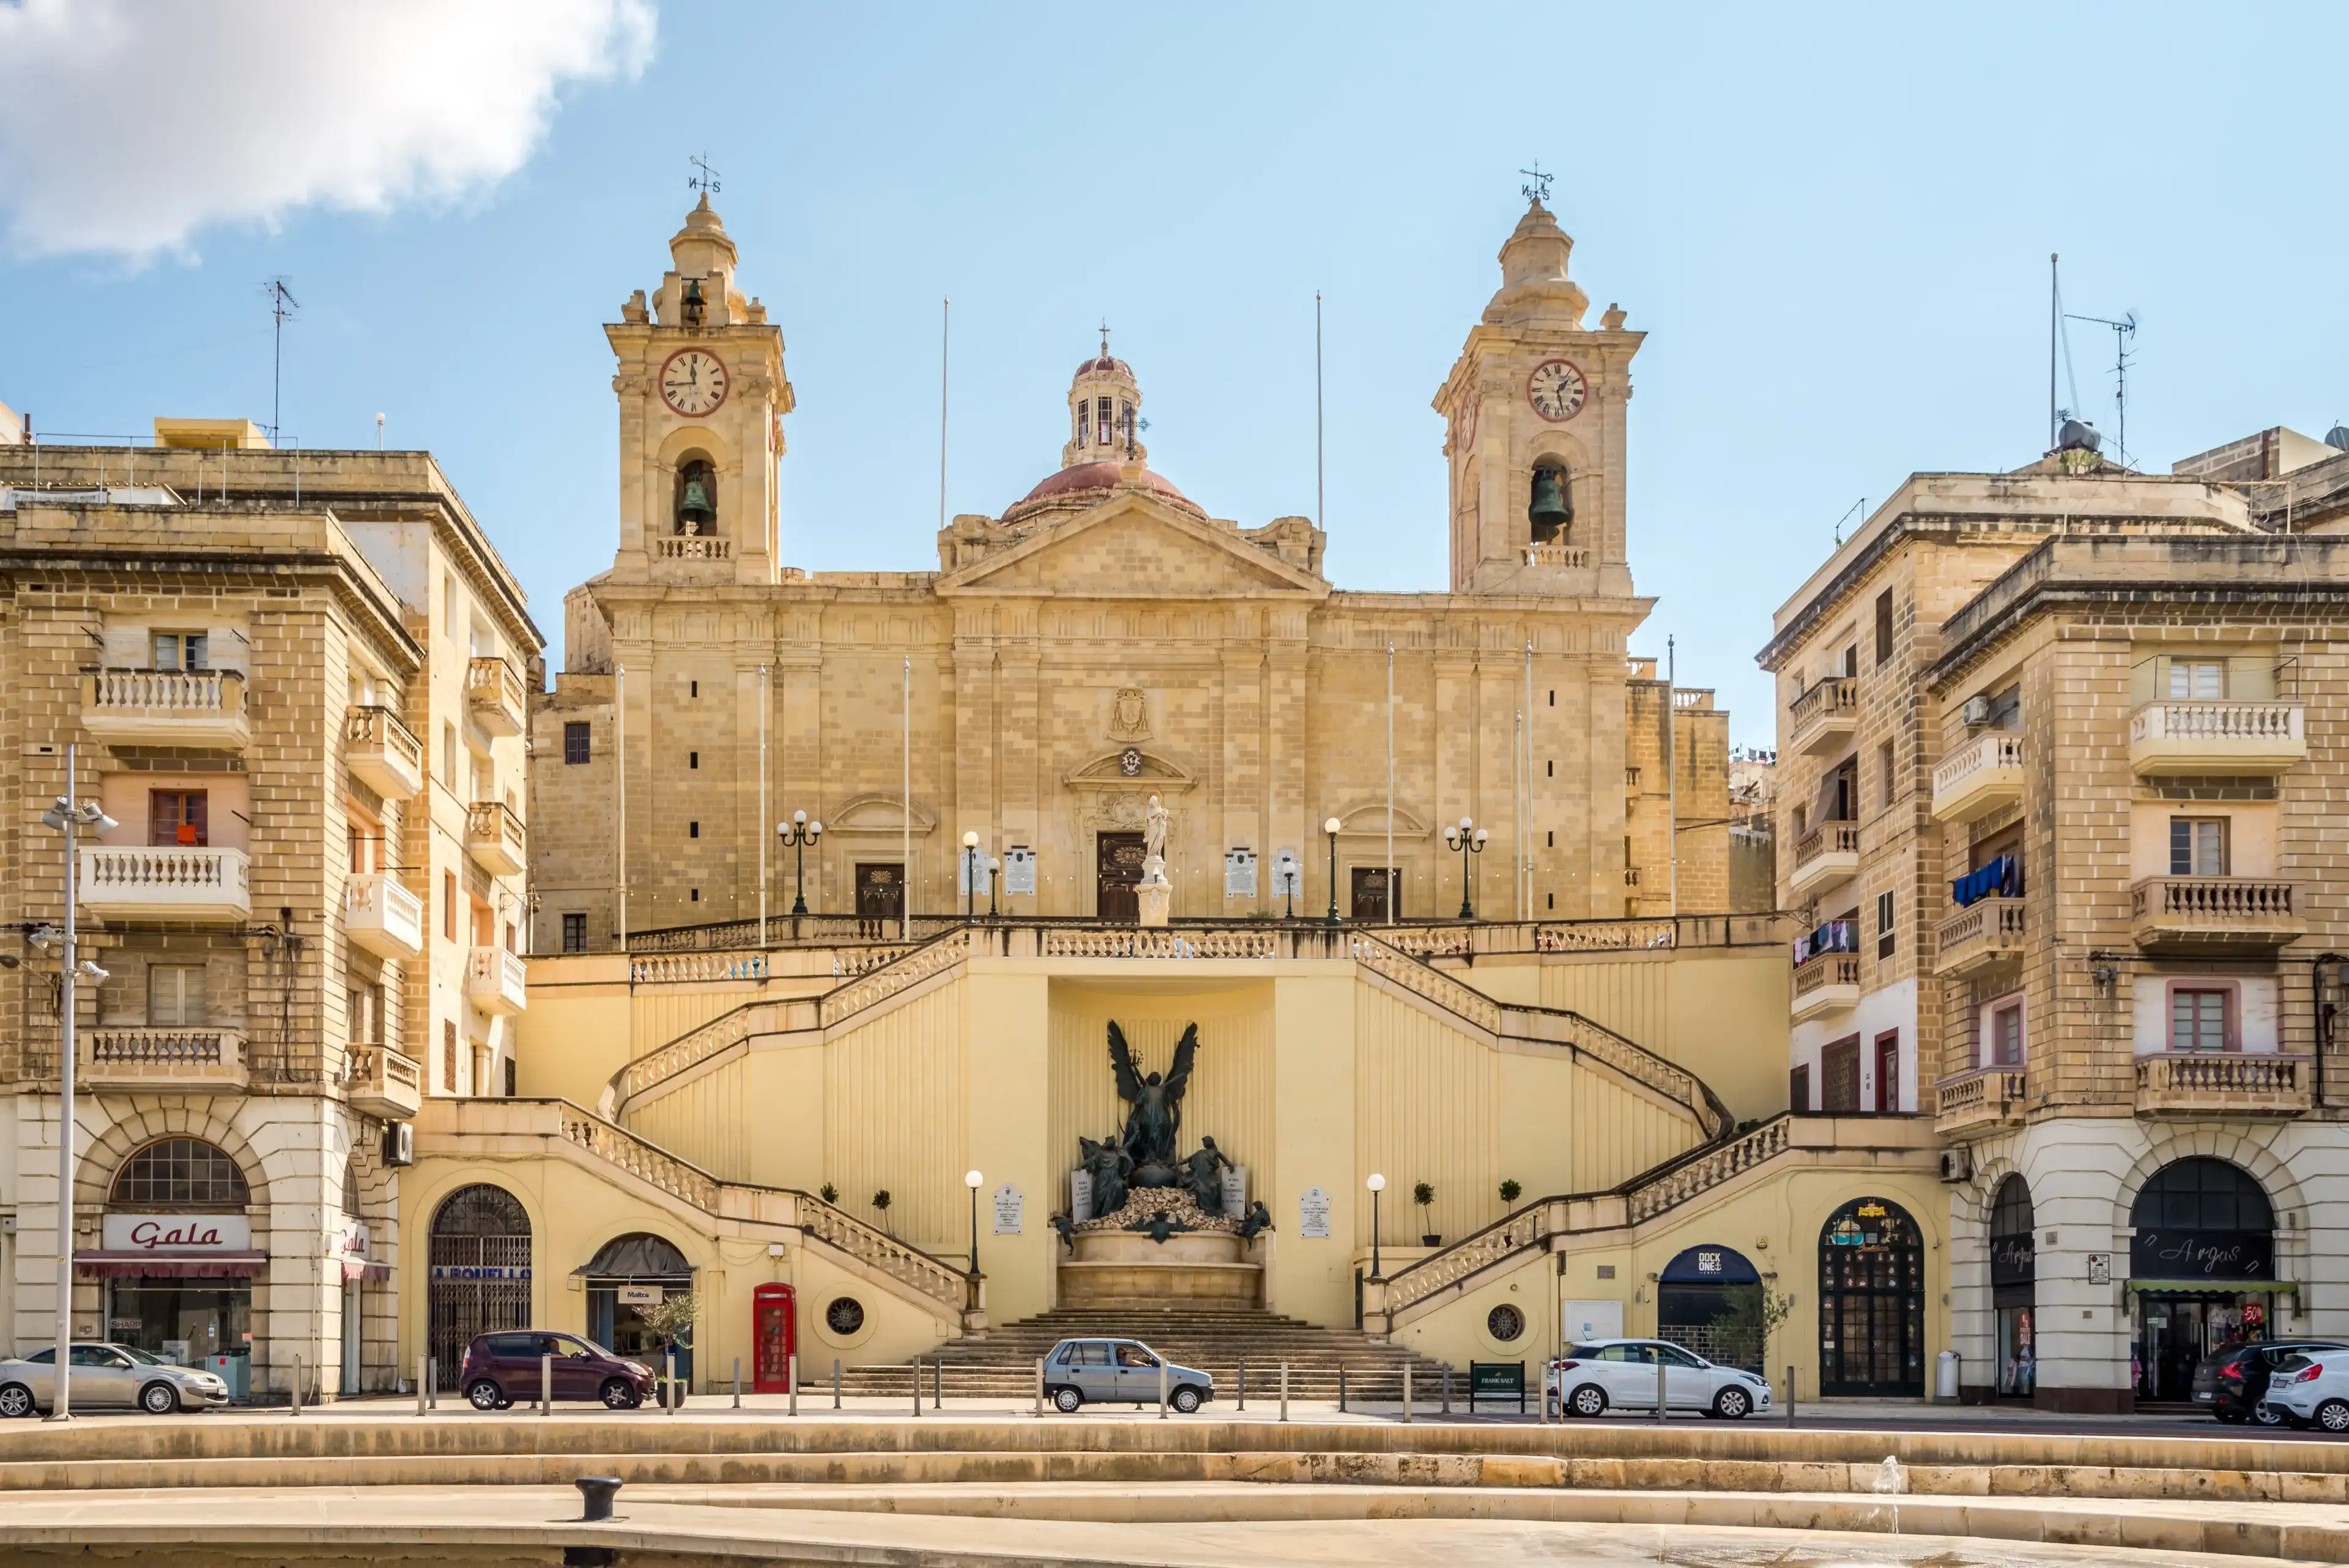 COSPICUA,MALTA - OCTOBER 4,2021 - View at the Church of Innaculate Conception in the streets of Cospicua. Cospicua (Bormla)is a double-fortified harbour city in the South Eastern Region of Malta.